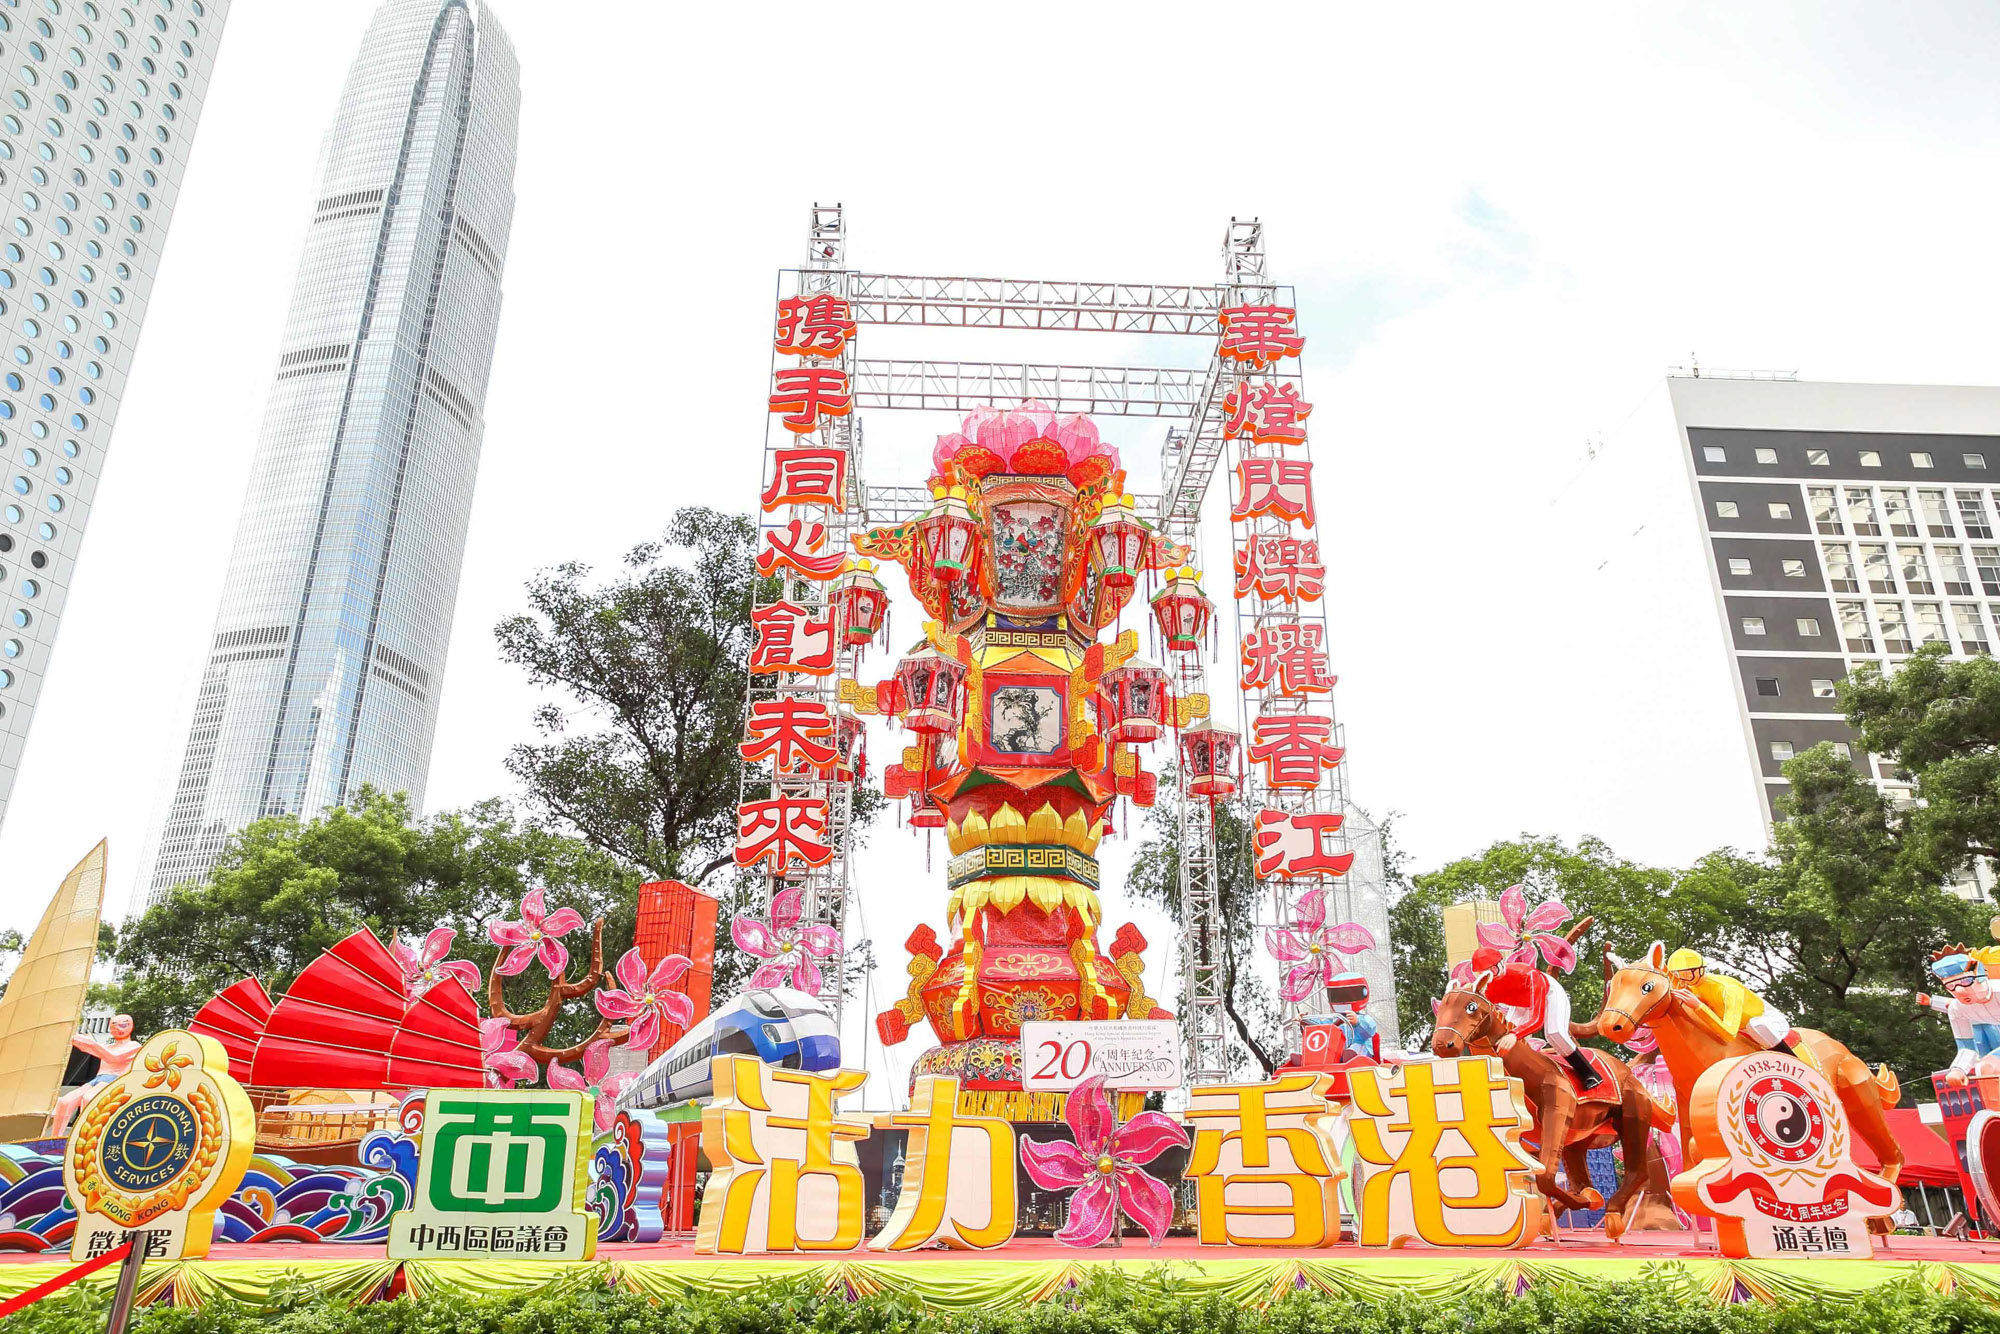 Photo 1 - An exhibition of mega-lantern was jointly held by the Department, Central and Western District Council, Central and Western District Office and Tung Sin Tan on June 25, 2017. This mega-lantern was made in parts by different groups of people, including persons in custody and sick children, and merged into a final product. This traditional lantern, which is the world’s largest hanging-type lantern, has successfully set a Guinness World Record.